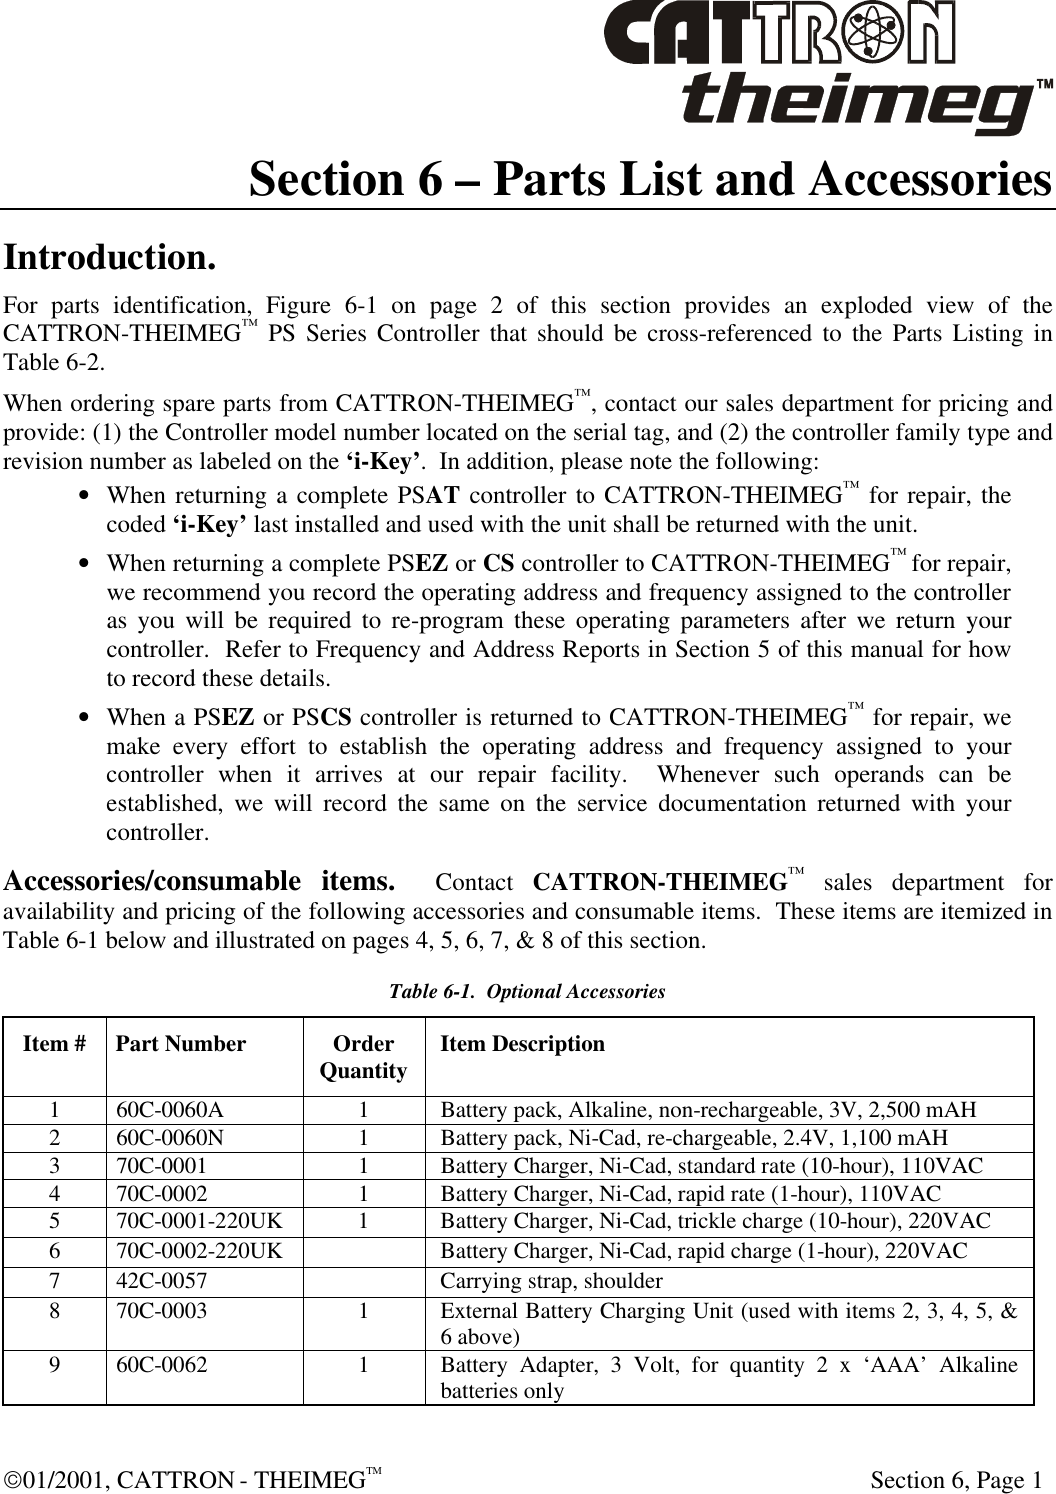  01/2001, CATTRON - THEIMEGTM  Section 6, Page 1 Section 6 – Parts List and Accessories Introduction. For parts identification, Figure 6-1 on page 2 of this section provides an exploded view of the CATTRON-THEIMEG™ PS Series Controller that should be cross-referenced to the Parts Listing in Table 6-2. When ordering spare parts from CATTRON-THEIMEG™, contact our sales department for pricing and provide: (1) the Controller model number located on the serial tag, and (2) the controller family type and revision number as labeled on the ‘i-Key’.  In addition, please note the following: • When returning a complete PSAT controller to CATTRON-THEIMEG™ for repair, the coded ‘i-Key’ last installed and used with the unit shall be returned with the unit. • When returning a complete PSEZ or CS controller to CATTRON-THEIMEG™ for repair, we recommend you record the operating address and frequency assigned to the controller as you will be required to re-program these operating parameters after we return your controller.  Refer to Frequency and Address Reports in Section 5 of this manual for how to record these details. • When a PSEZ or PSCS controller is returned to CATTRON-THEIMEG™ for repair, we make every effort to establish the operating address and frequency assigned to your controller when it arrives at our repair facility.  Whenever such operands can be established, we will record the same on the service documentation returned with your controller. Accessories/consumable items.  Contact CATTRON-THEIMEG™ sales department for availability and pricing of the following accessories and consumable items.  These items are itemized in Table 6-1 below and illustrated on pages 4, 5, 6, 7, &amp; 8 of this section. Table 6-1.  Optional Accessories Item # Part Number Order Quantity Item Description 1 60C-0060A 1 Battery pack, Alkaline, non-rechargeable, 3V, 2,500 mAH 2 60C-0060N 1 Battery pack, Ni-Cad, re-chargeable, 2.4V, 1,100 mAH 3 70C-0001 1 Battery Charger, Ni-Cad, standard rate (10-hour), 110VAC 4 70C-0002 1 Battery Charger, Ni-Cad, rapid rate (1-hour), 110VAC 5 70C-0001-220UK 1 Battery Charger, Ni-Cad, trickle charge (10-hour), 220VAC 6 70C-0002-220UK    Battery Charger, Ni-Cad, rapid charge (1-hour), 220VAC 7 42C-0057  Carrying strap, shoulder 8 70C-0003 1 External Battery Charging Unit (used with items 2, 3, 4, 5, &amp; 6 above) 9 60C-0062 1 Battery Adapter, 3 Volt, for quantity 2 x ‘AAA’ Alkaline batteries only 